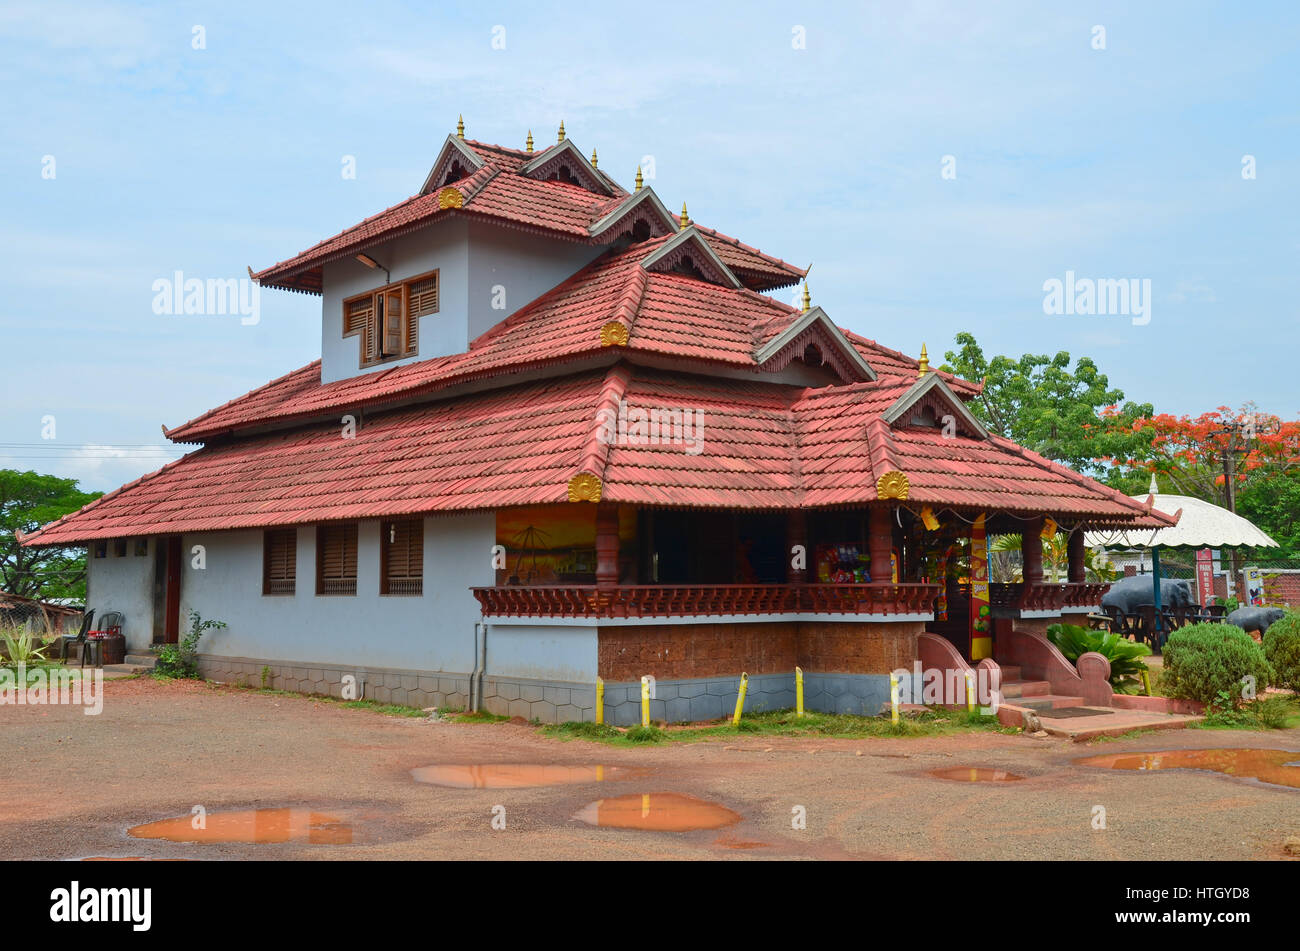 Traditional Architecture Of A Tiled Roof House In Kerala Using Stock